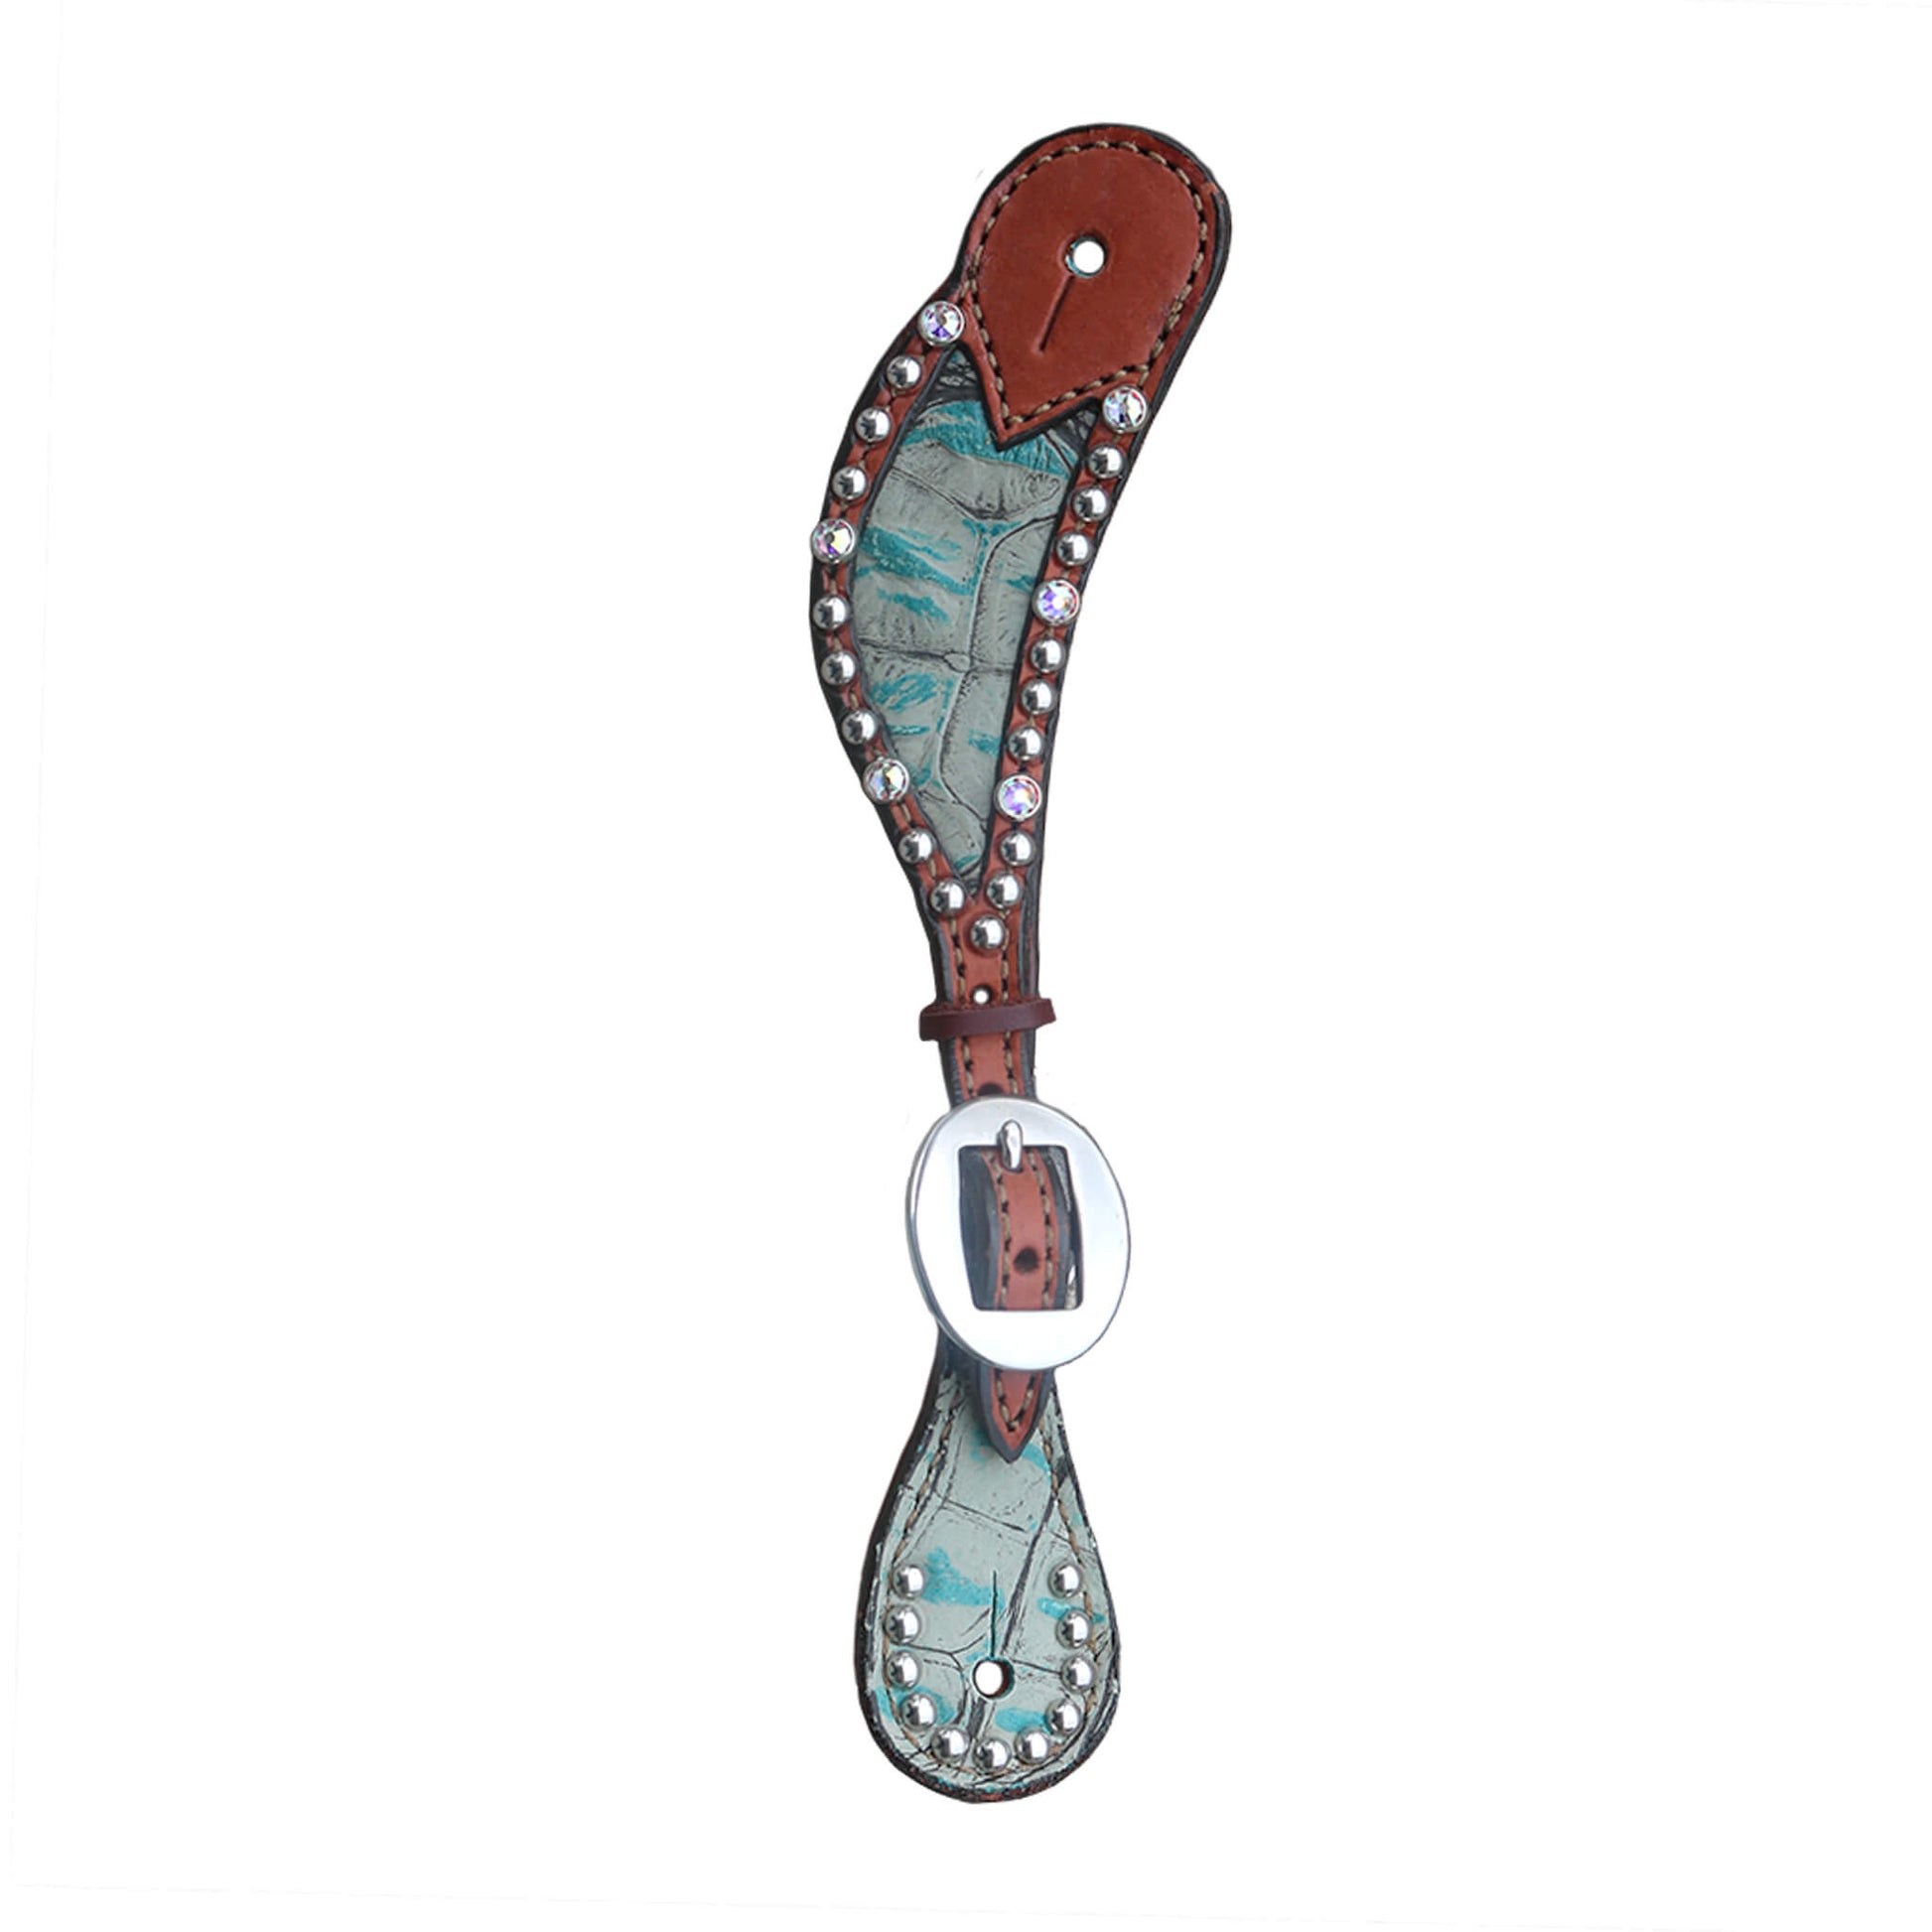 Ladies spur straps golden leather turquoise gator inlay with Swarovski crystals and SS spots.